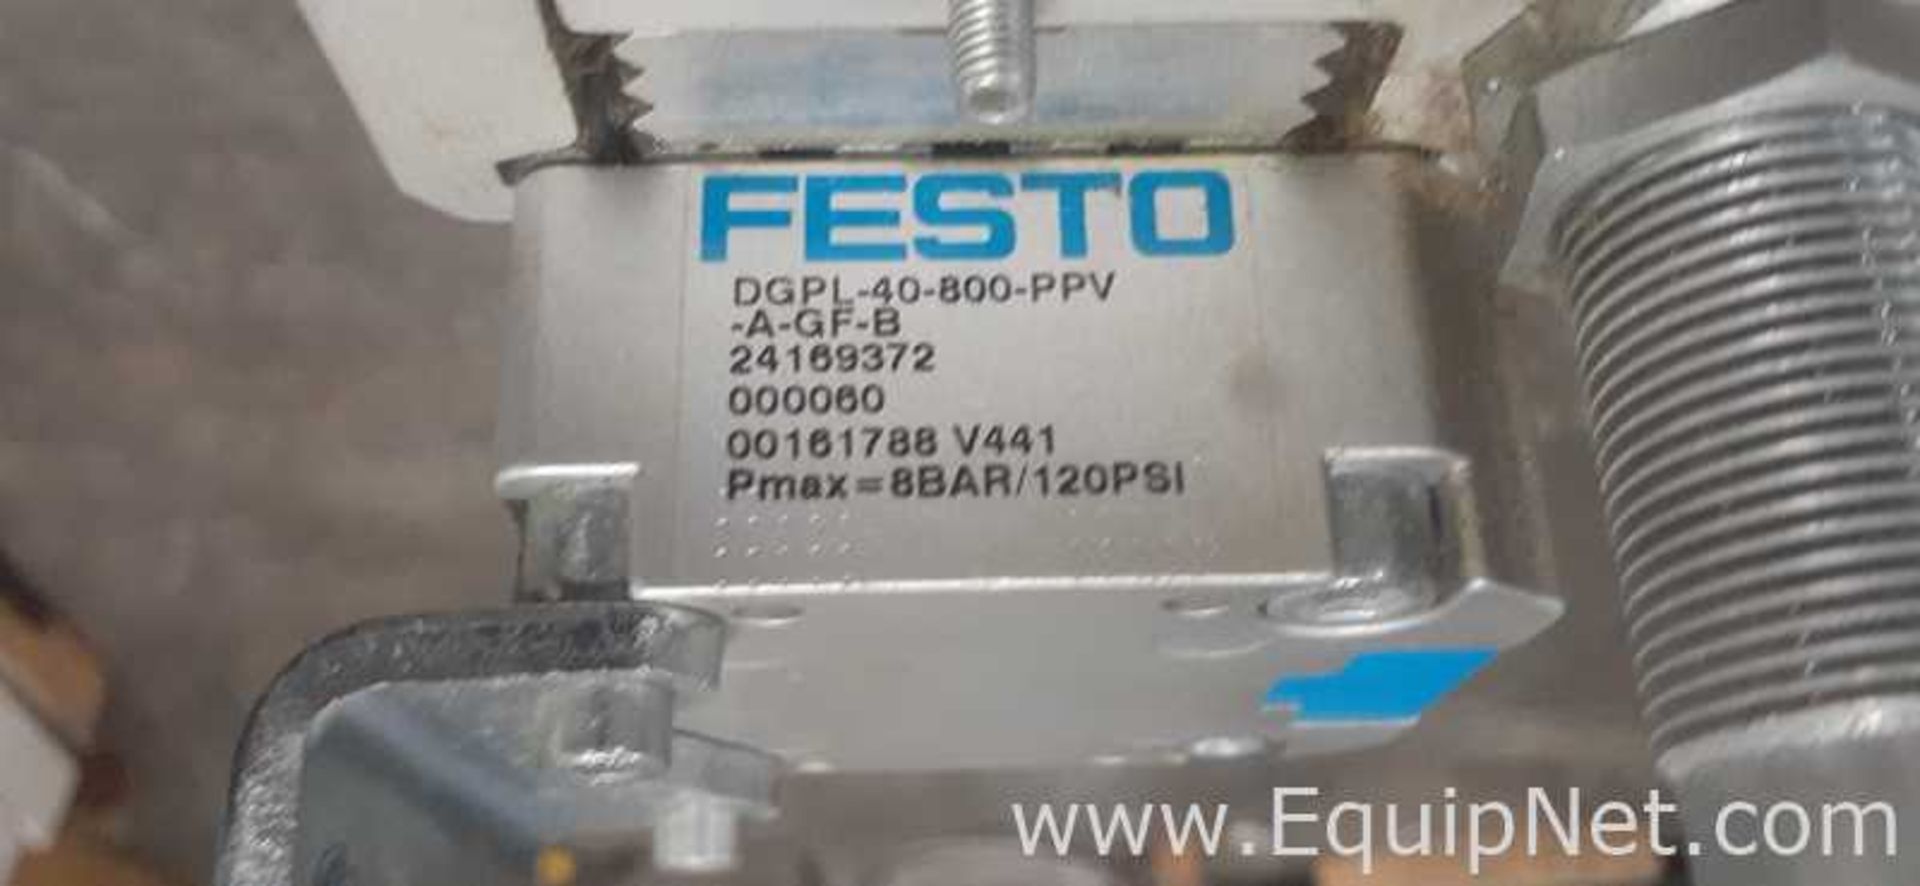 Festo 800 MM Linear Drive Rodless Pneumatic Cylinder - Image 3 of 5